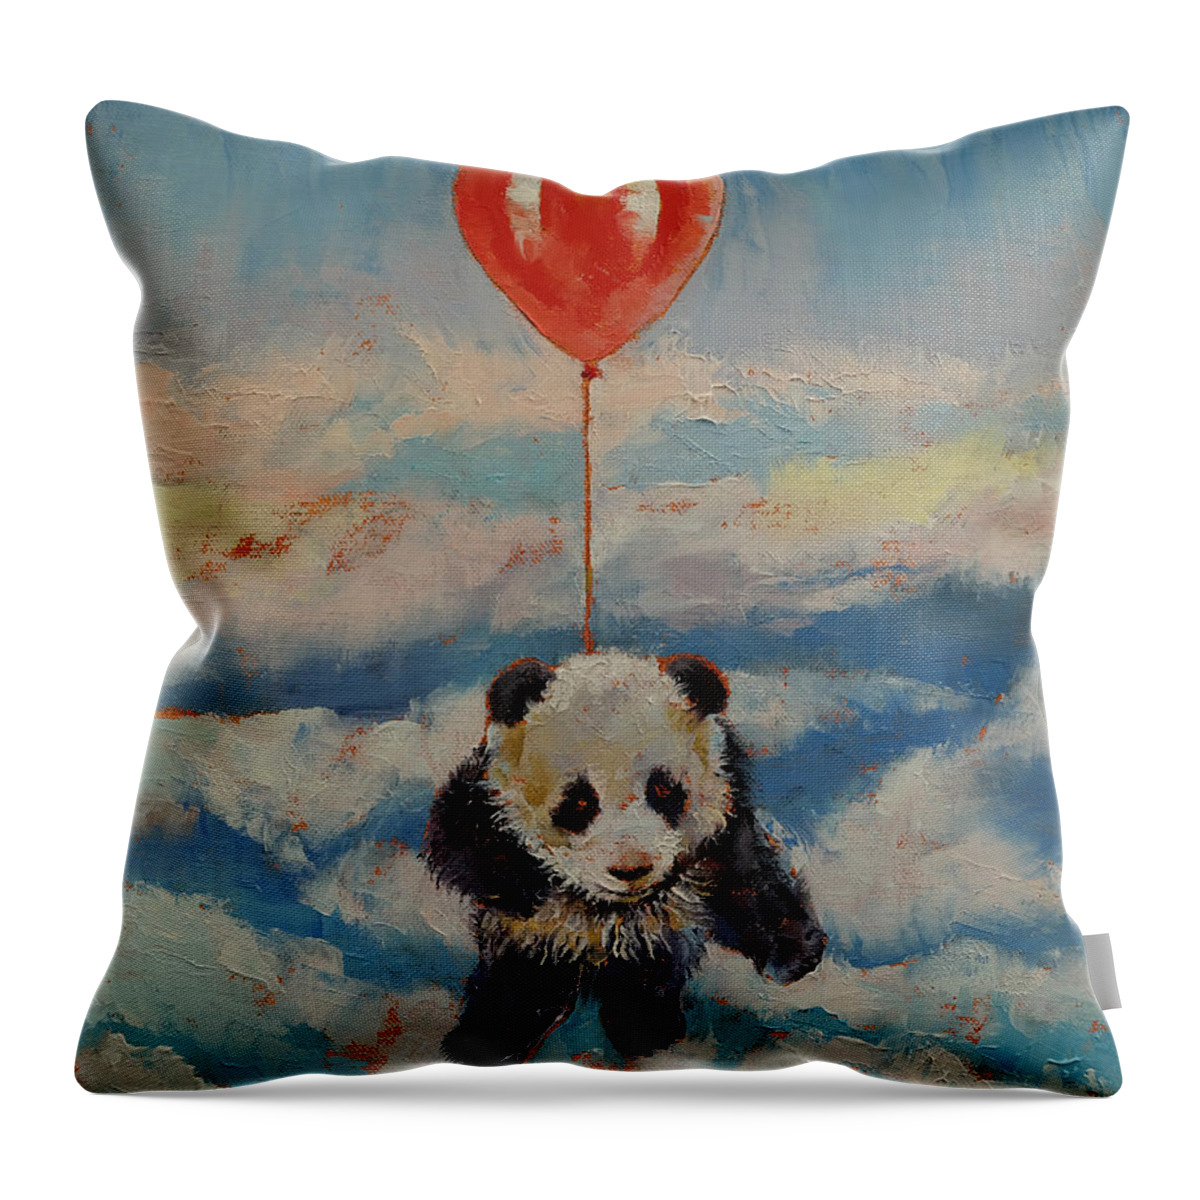 Children's Room Throw Pillow featuring the painting Balloon Ride by Michael Creese